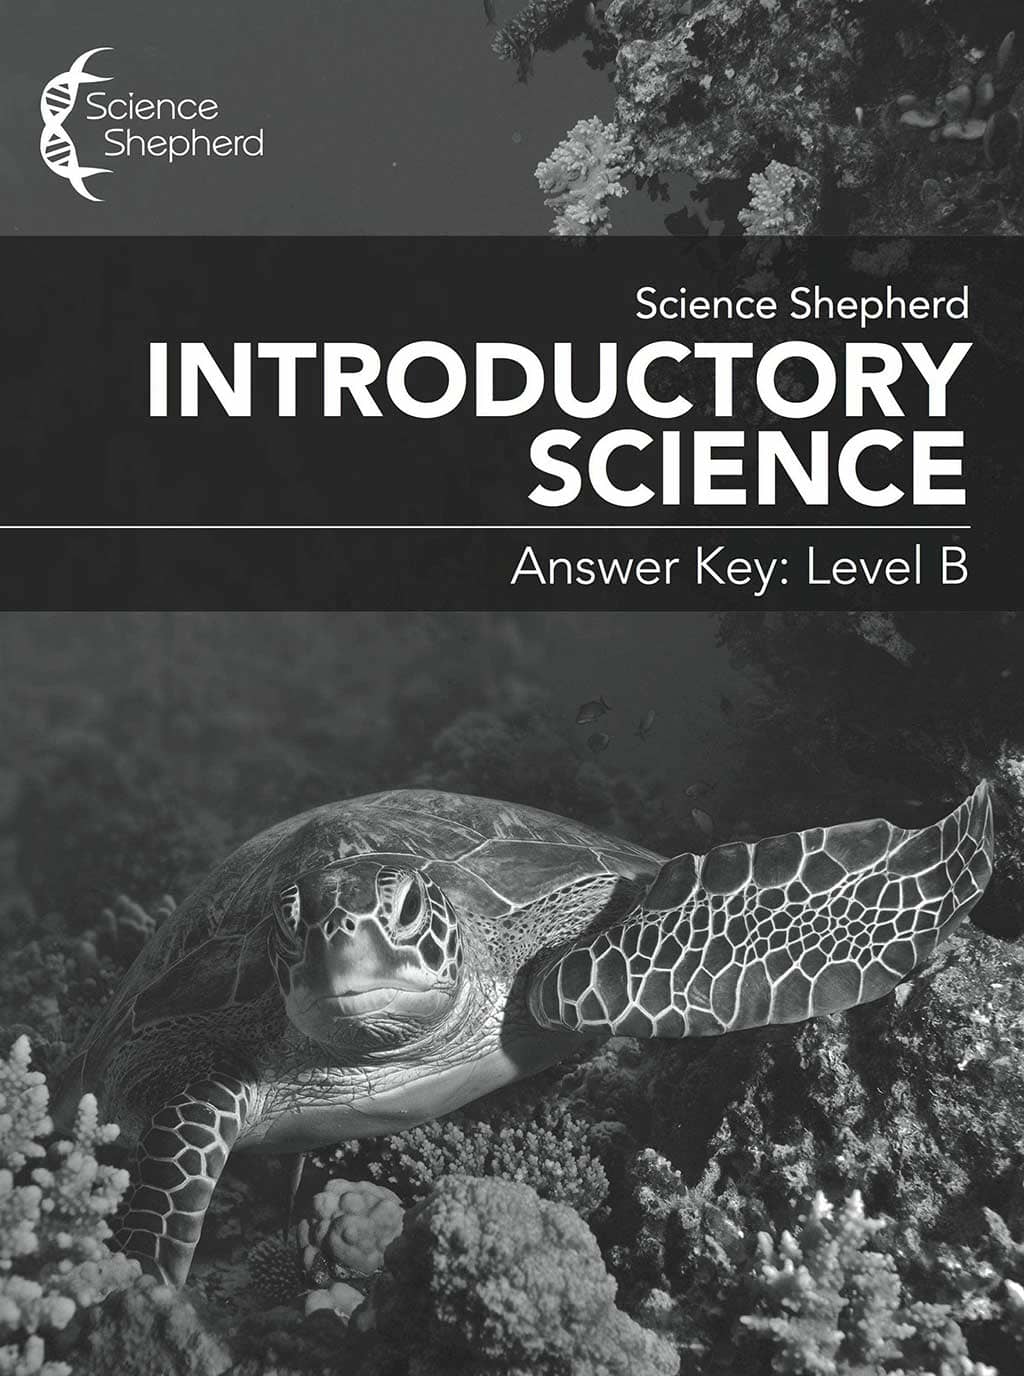 Science Shepherd homeschool elementary science Answer Key Level B cover of a turtle in grayscale